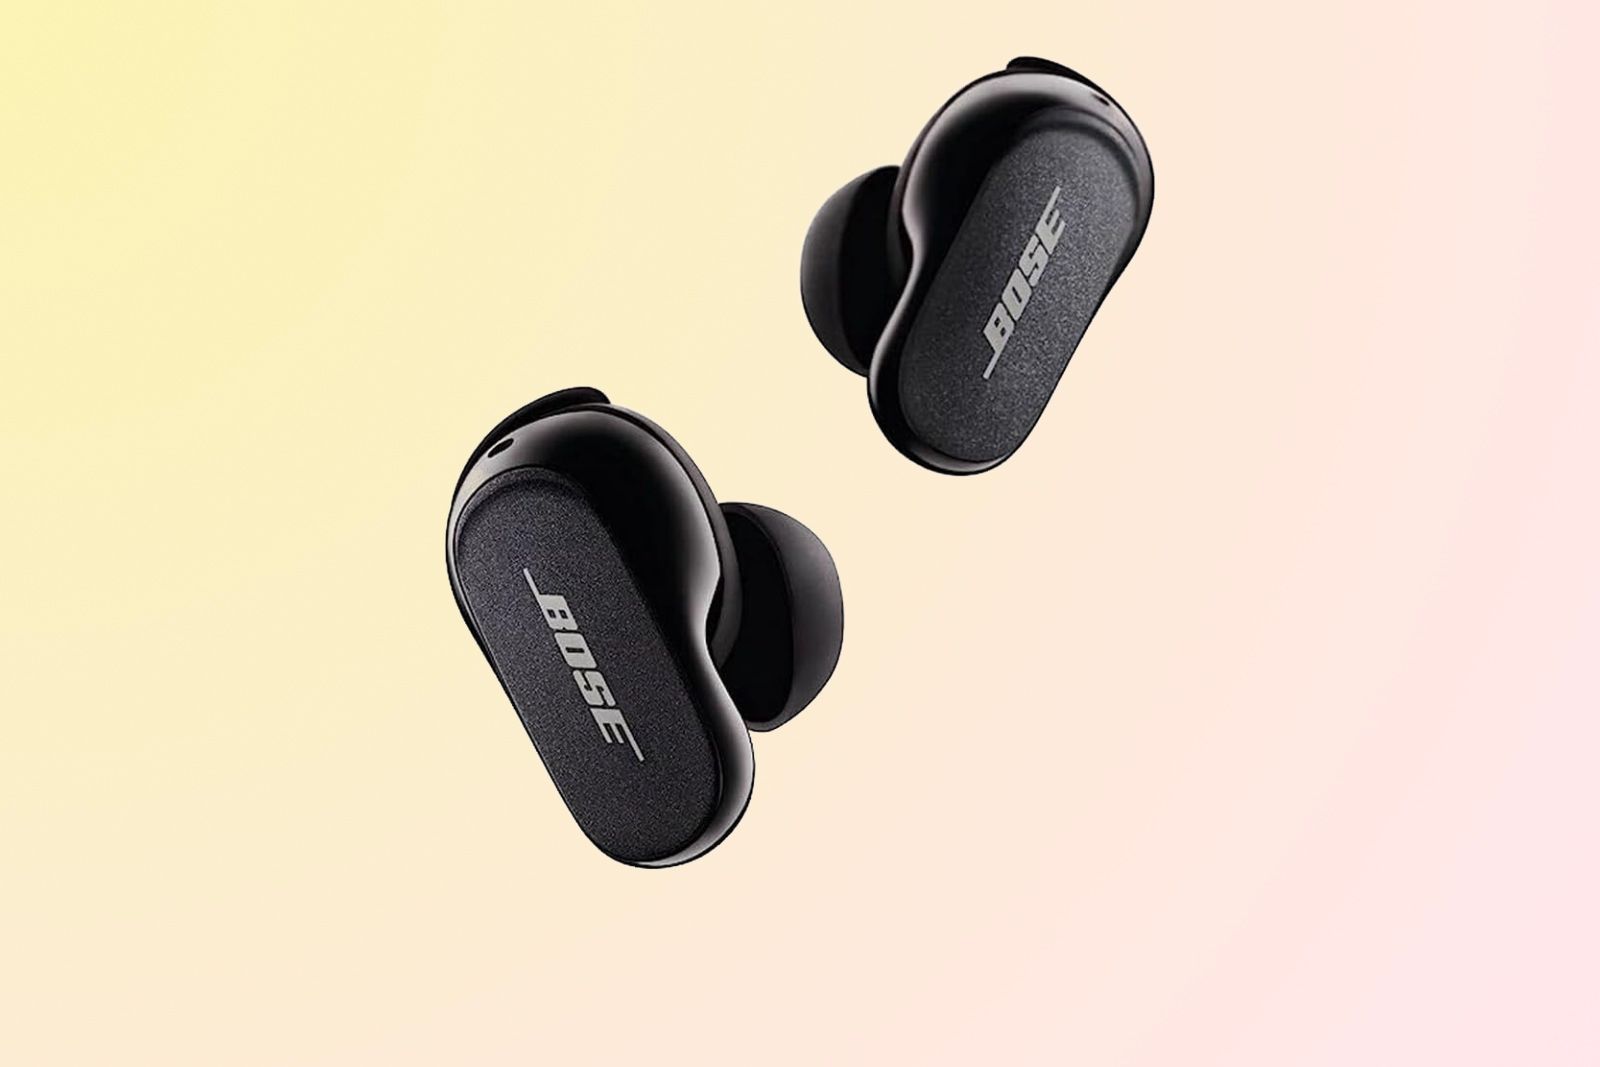 Two black earbuds with Bose written on the side.